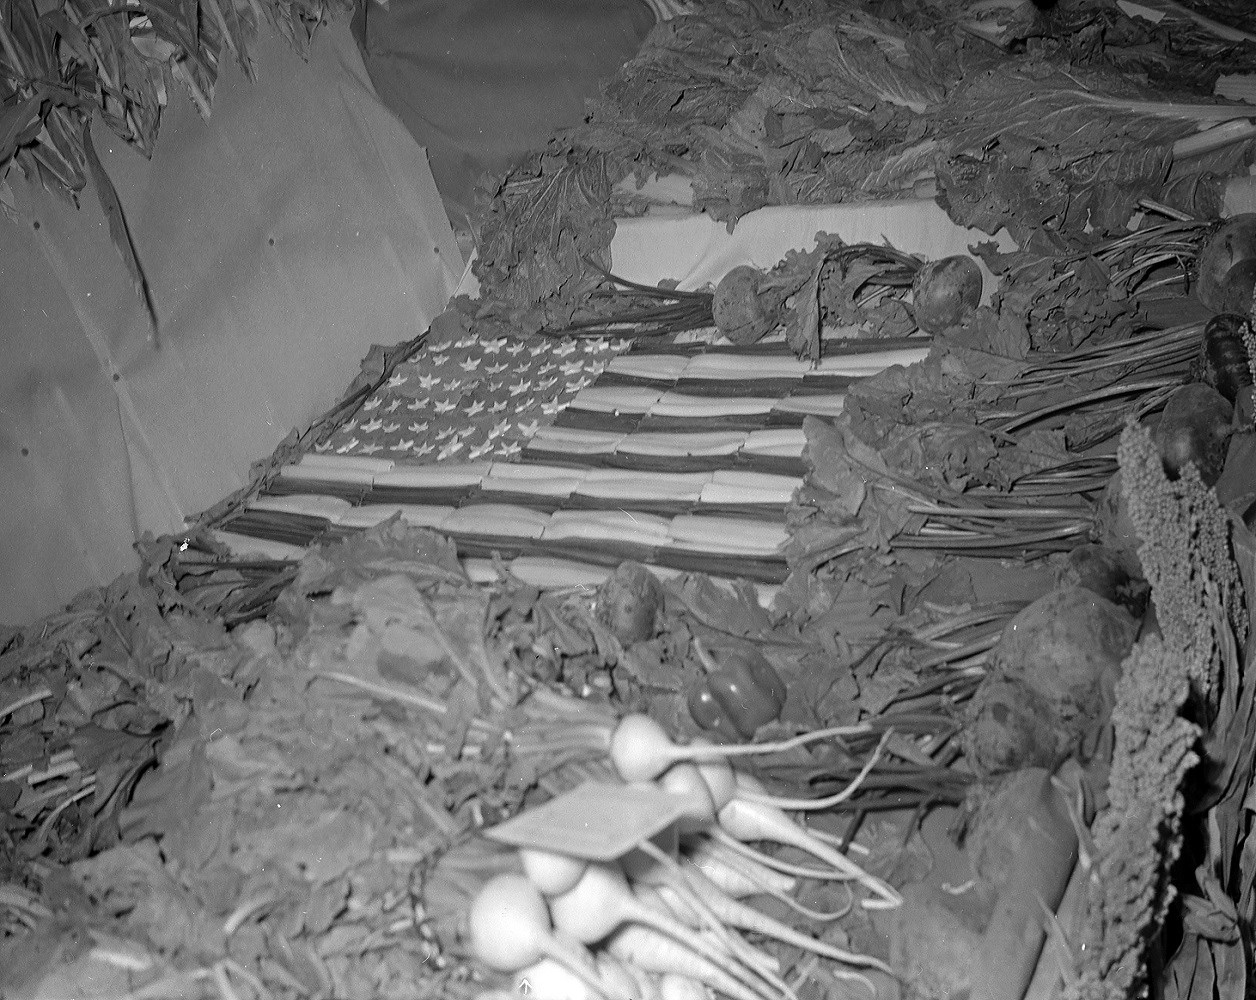 Black and white photo of produce on display. There is corn, radishes, beets, kale, and carrots among other things.